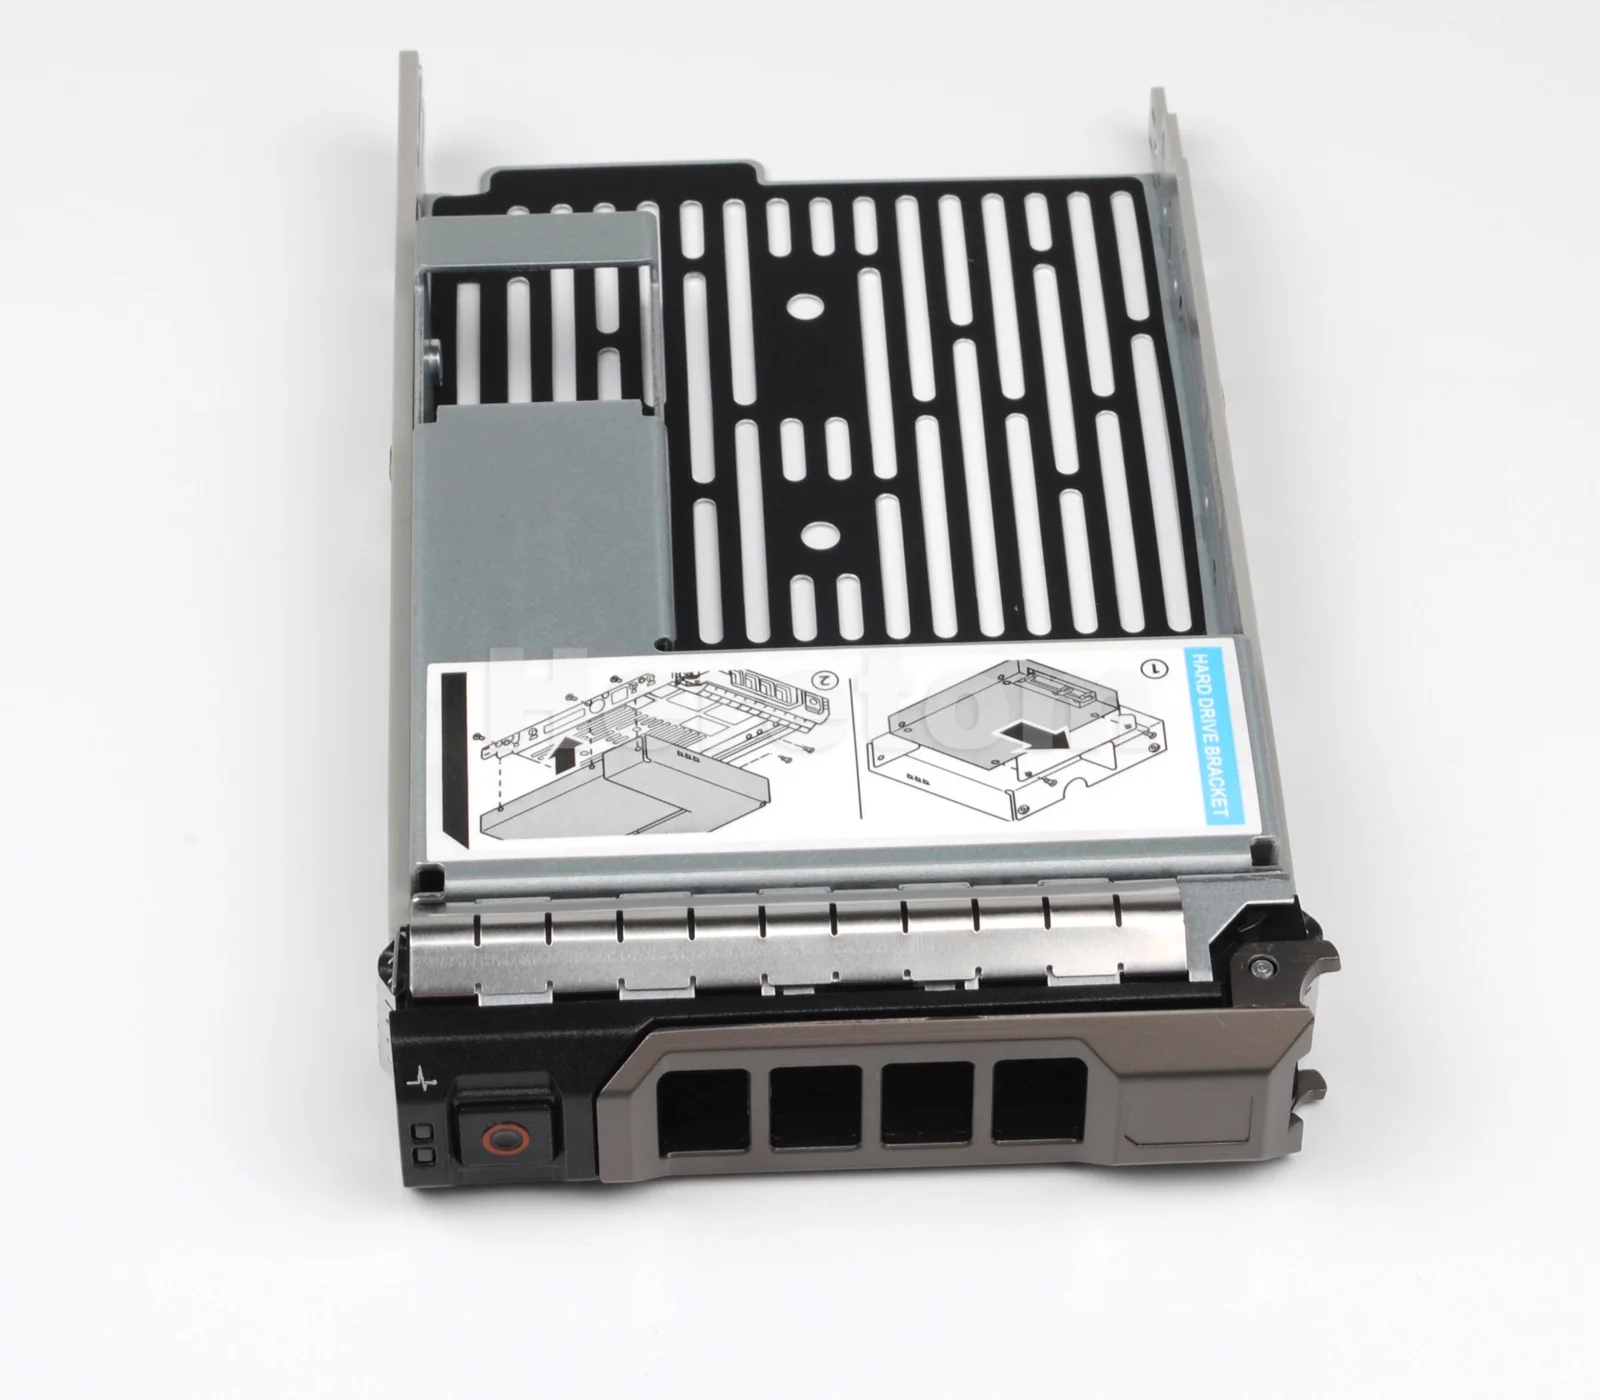 

2.5" to 3.5" HDD SATA SAS Hard Drive Tray Caddy Adapter For Dell PowerEdge T130 T310 T410 T440 T610 T640 Server 3.5INCH